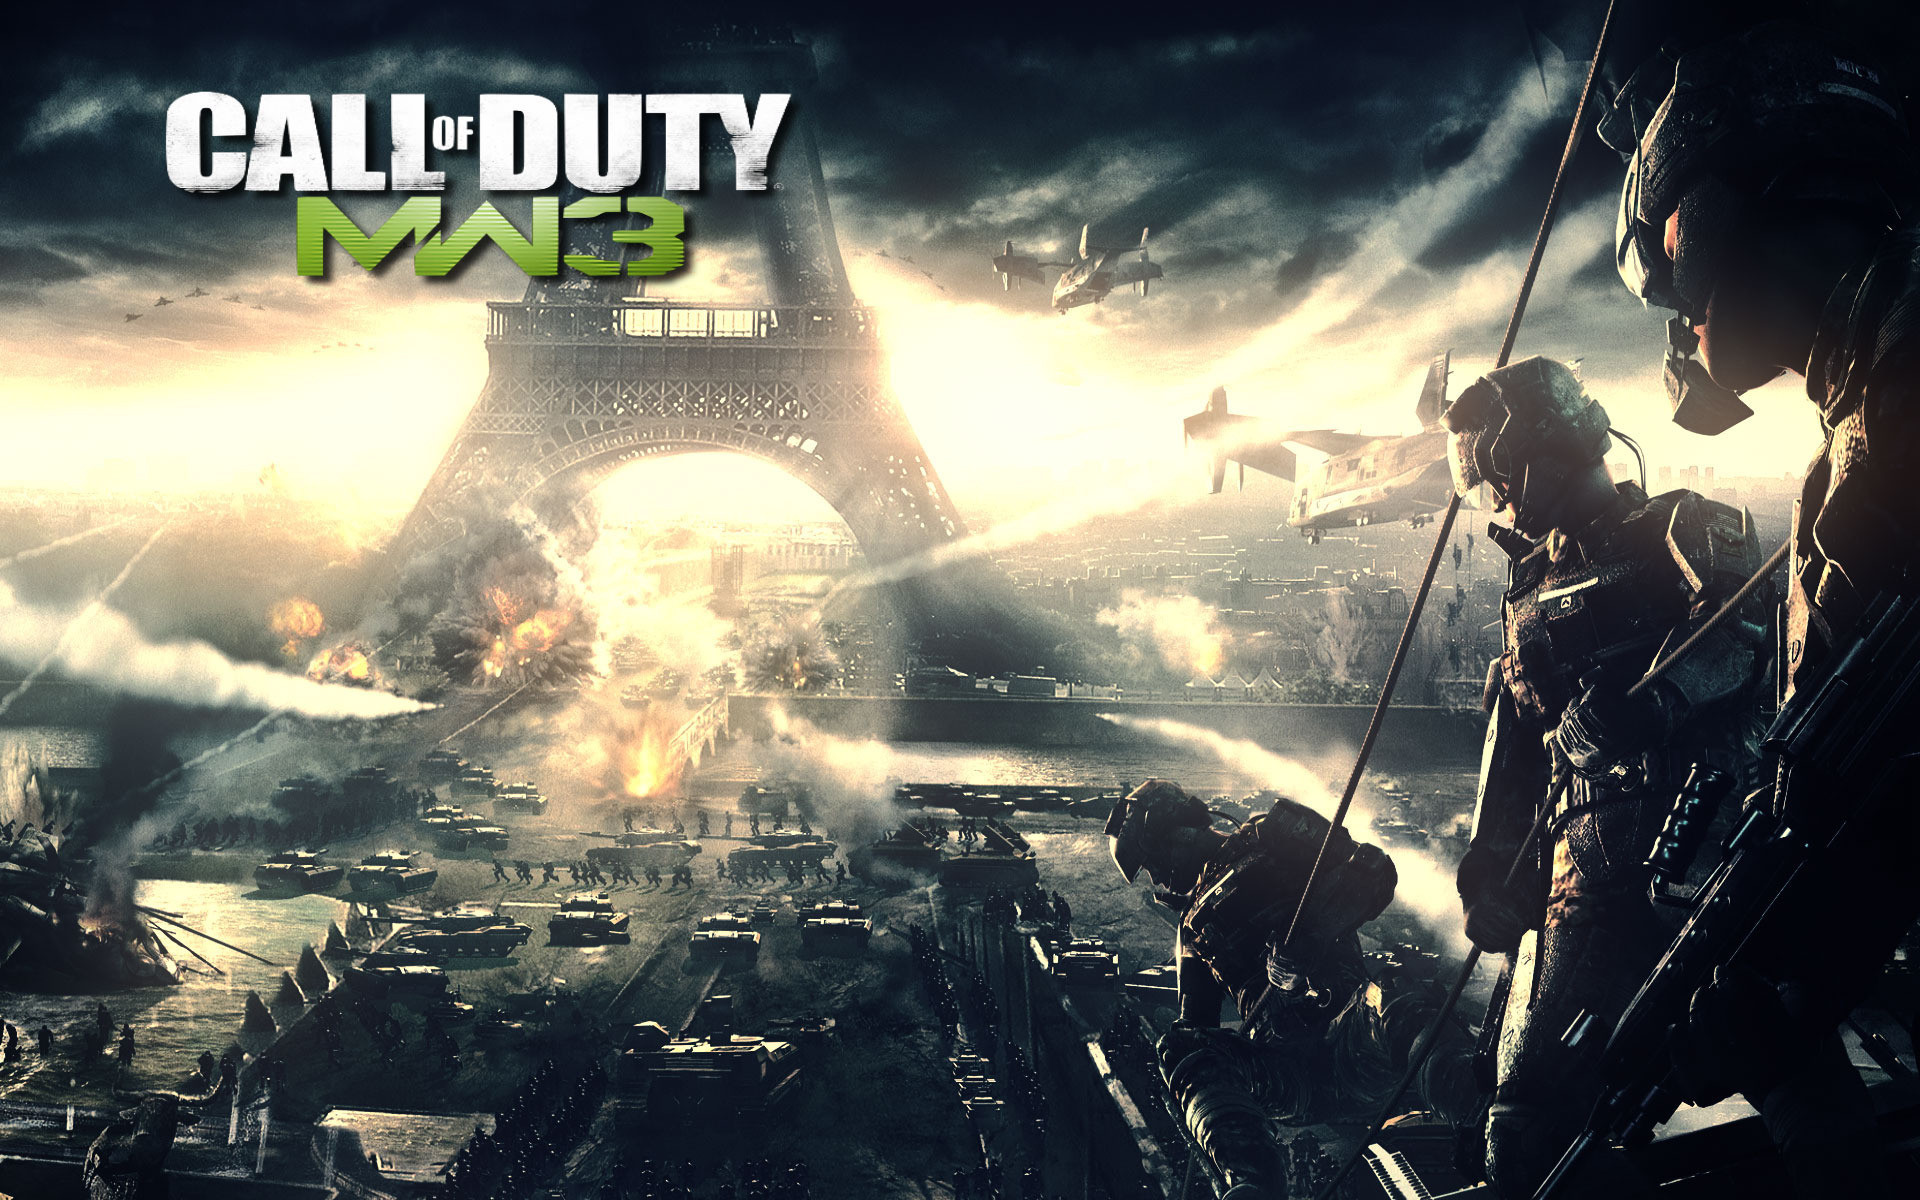 1920x1200 0 Call of Duty Wallpaper 1920X1080 Call of Duty Wallpapers HD HD Wallpapers,  Backgrounds, Images.